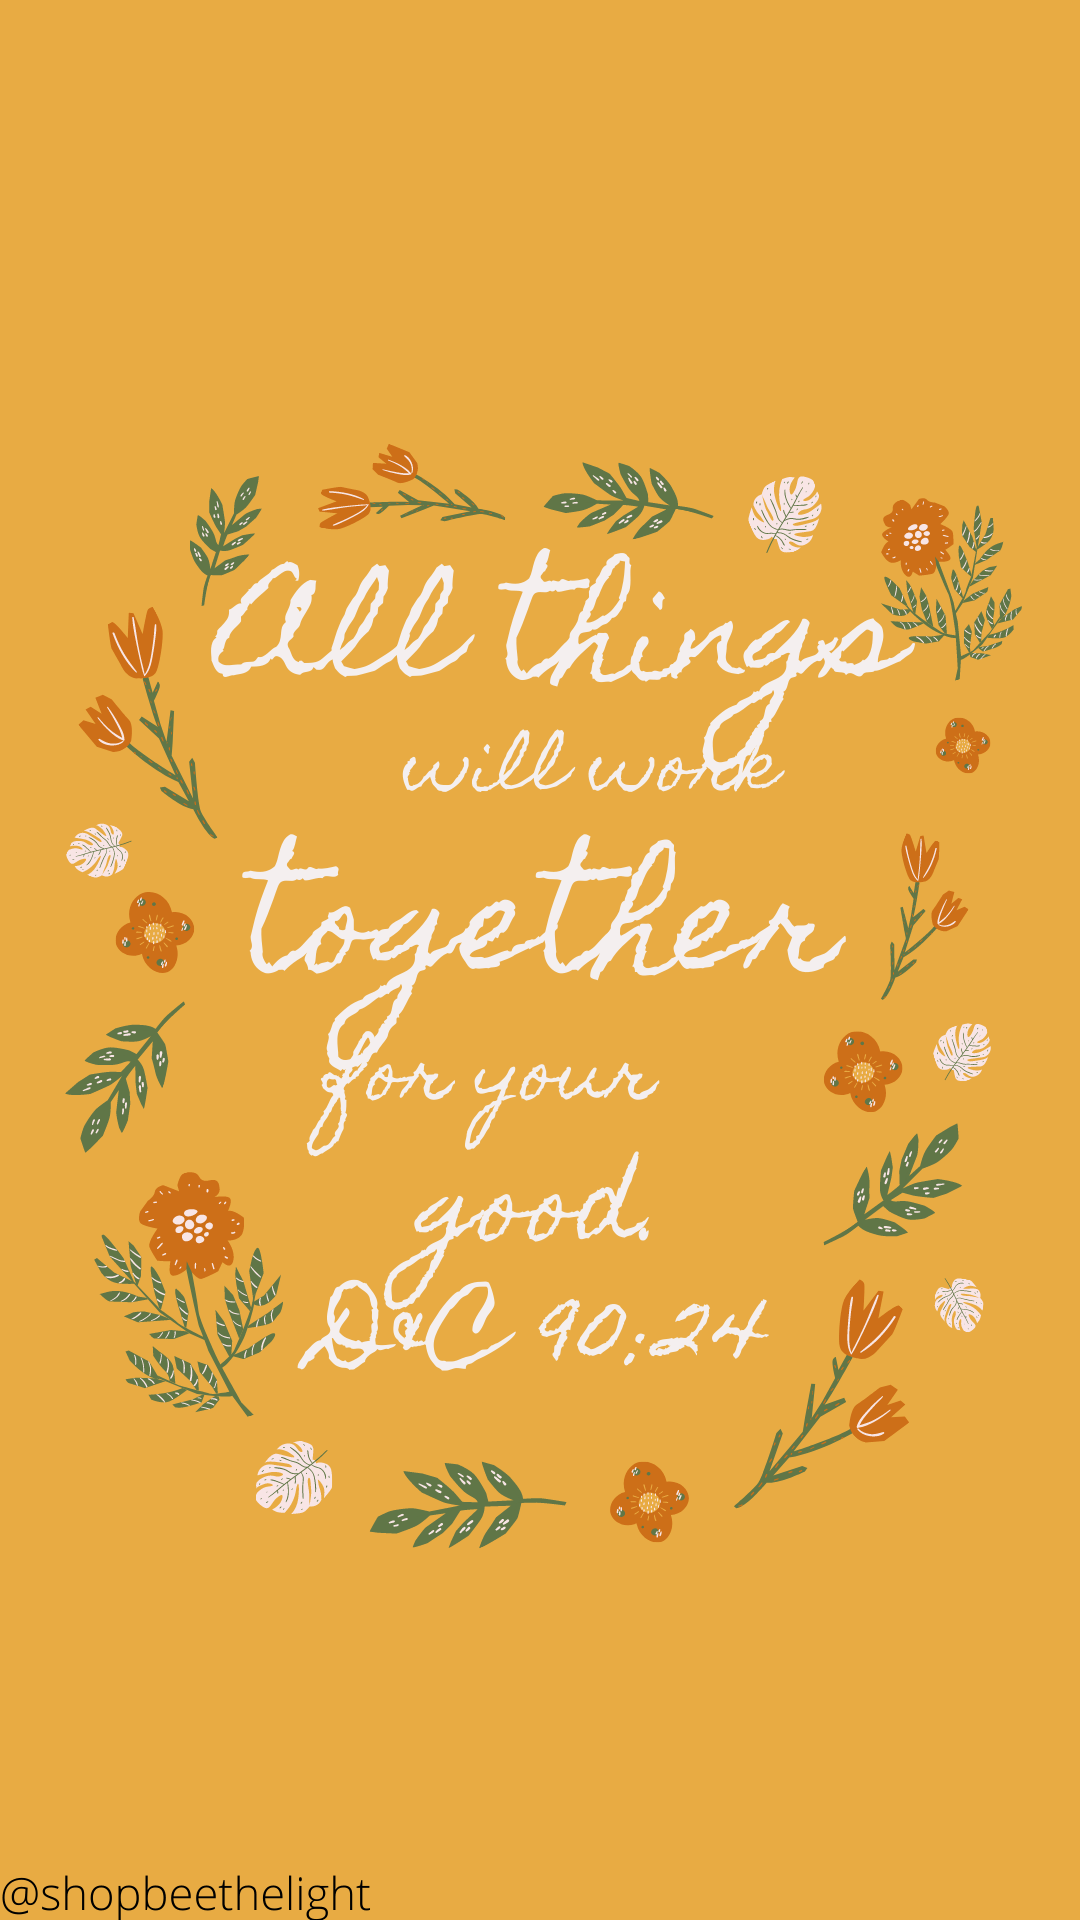 FREE Phone Wallpaper - All things shall work together for your good - Bee The Light